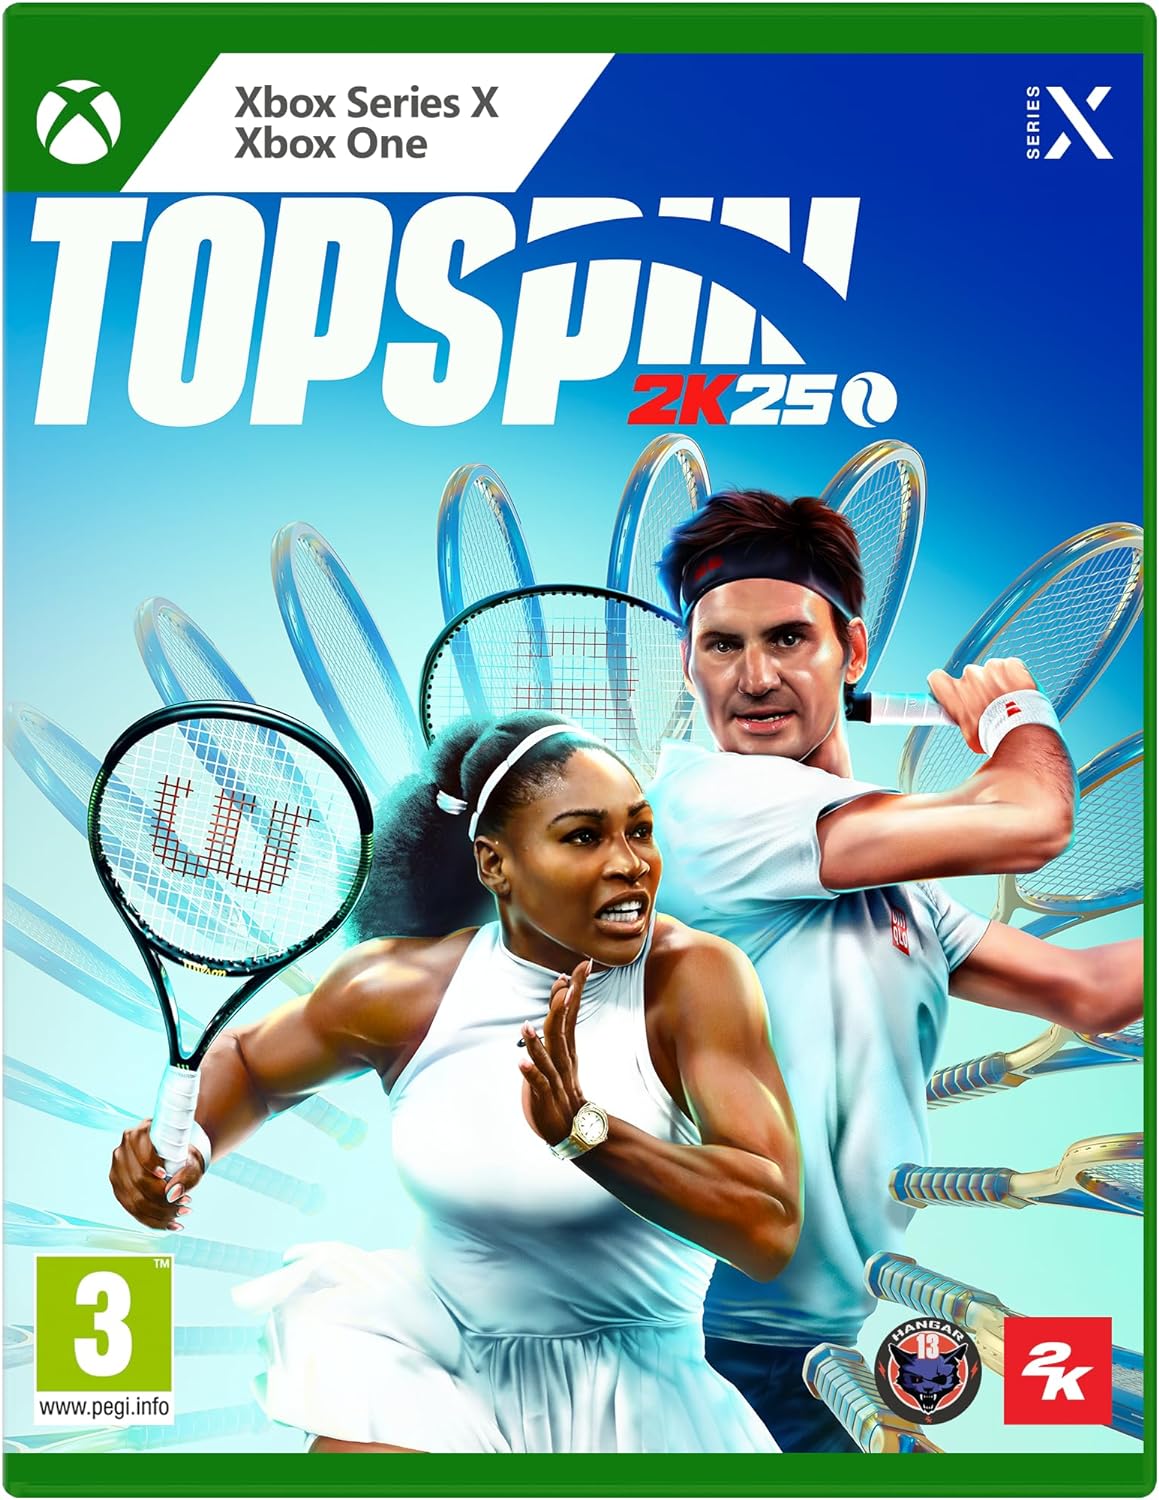 TopSpin 2K25 Deluxe Edition Key (Xbox One/Series X): VPN Activated Key